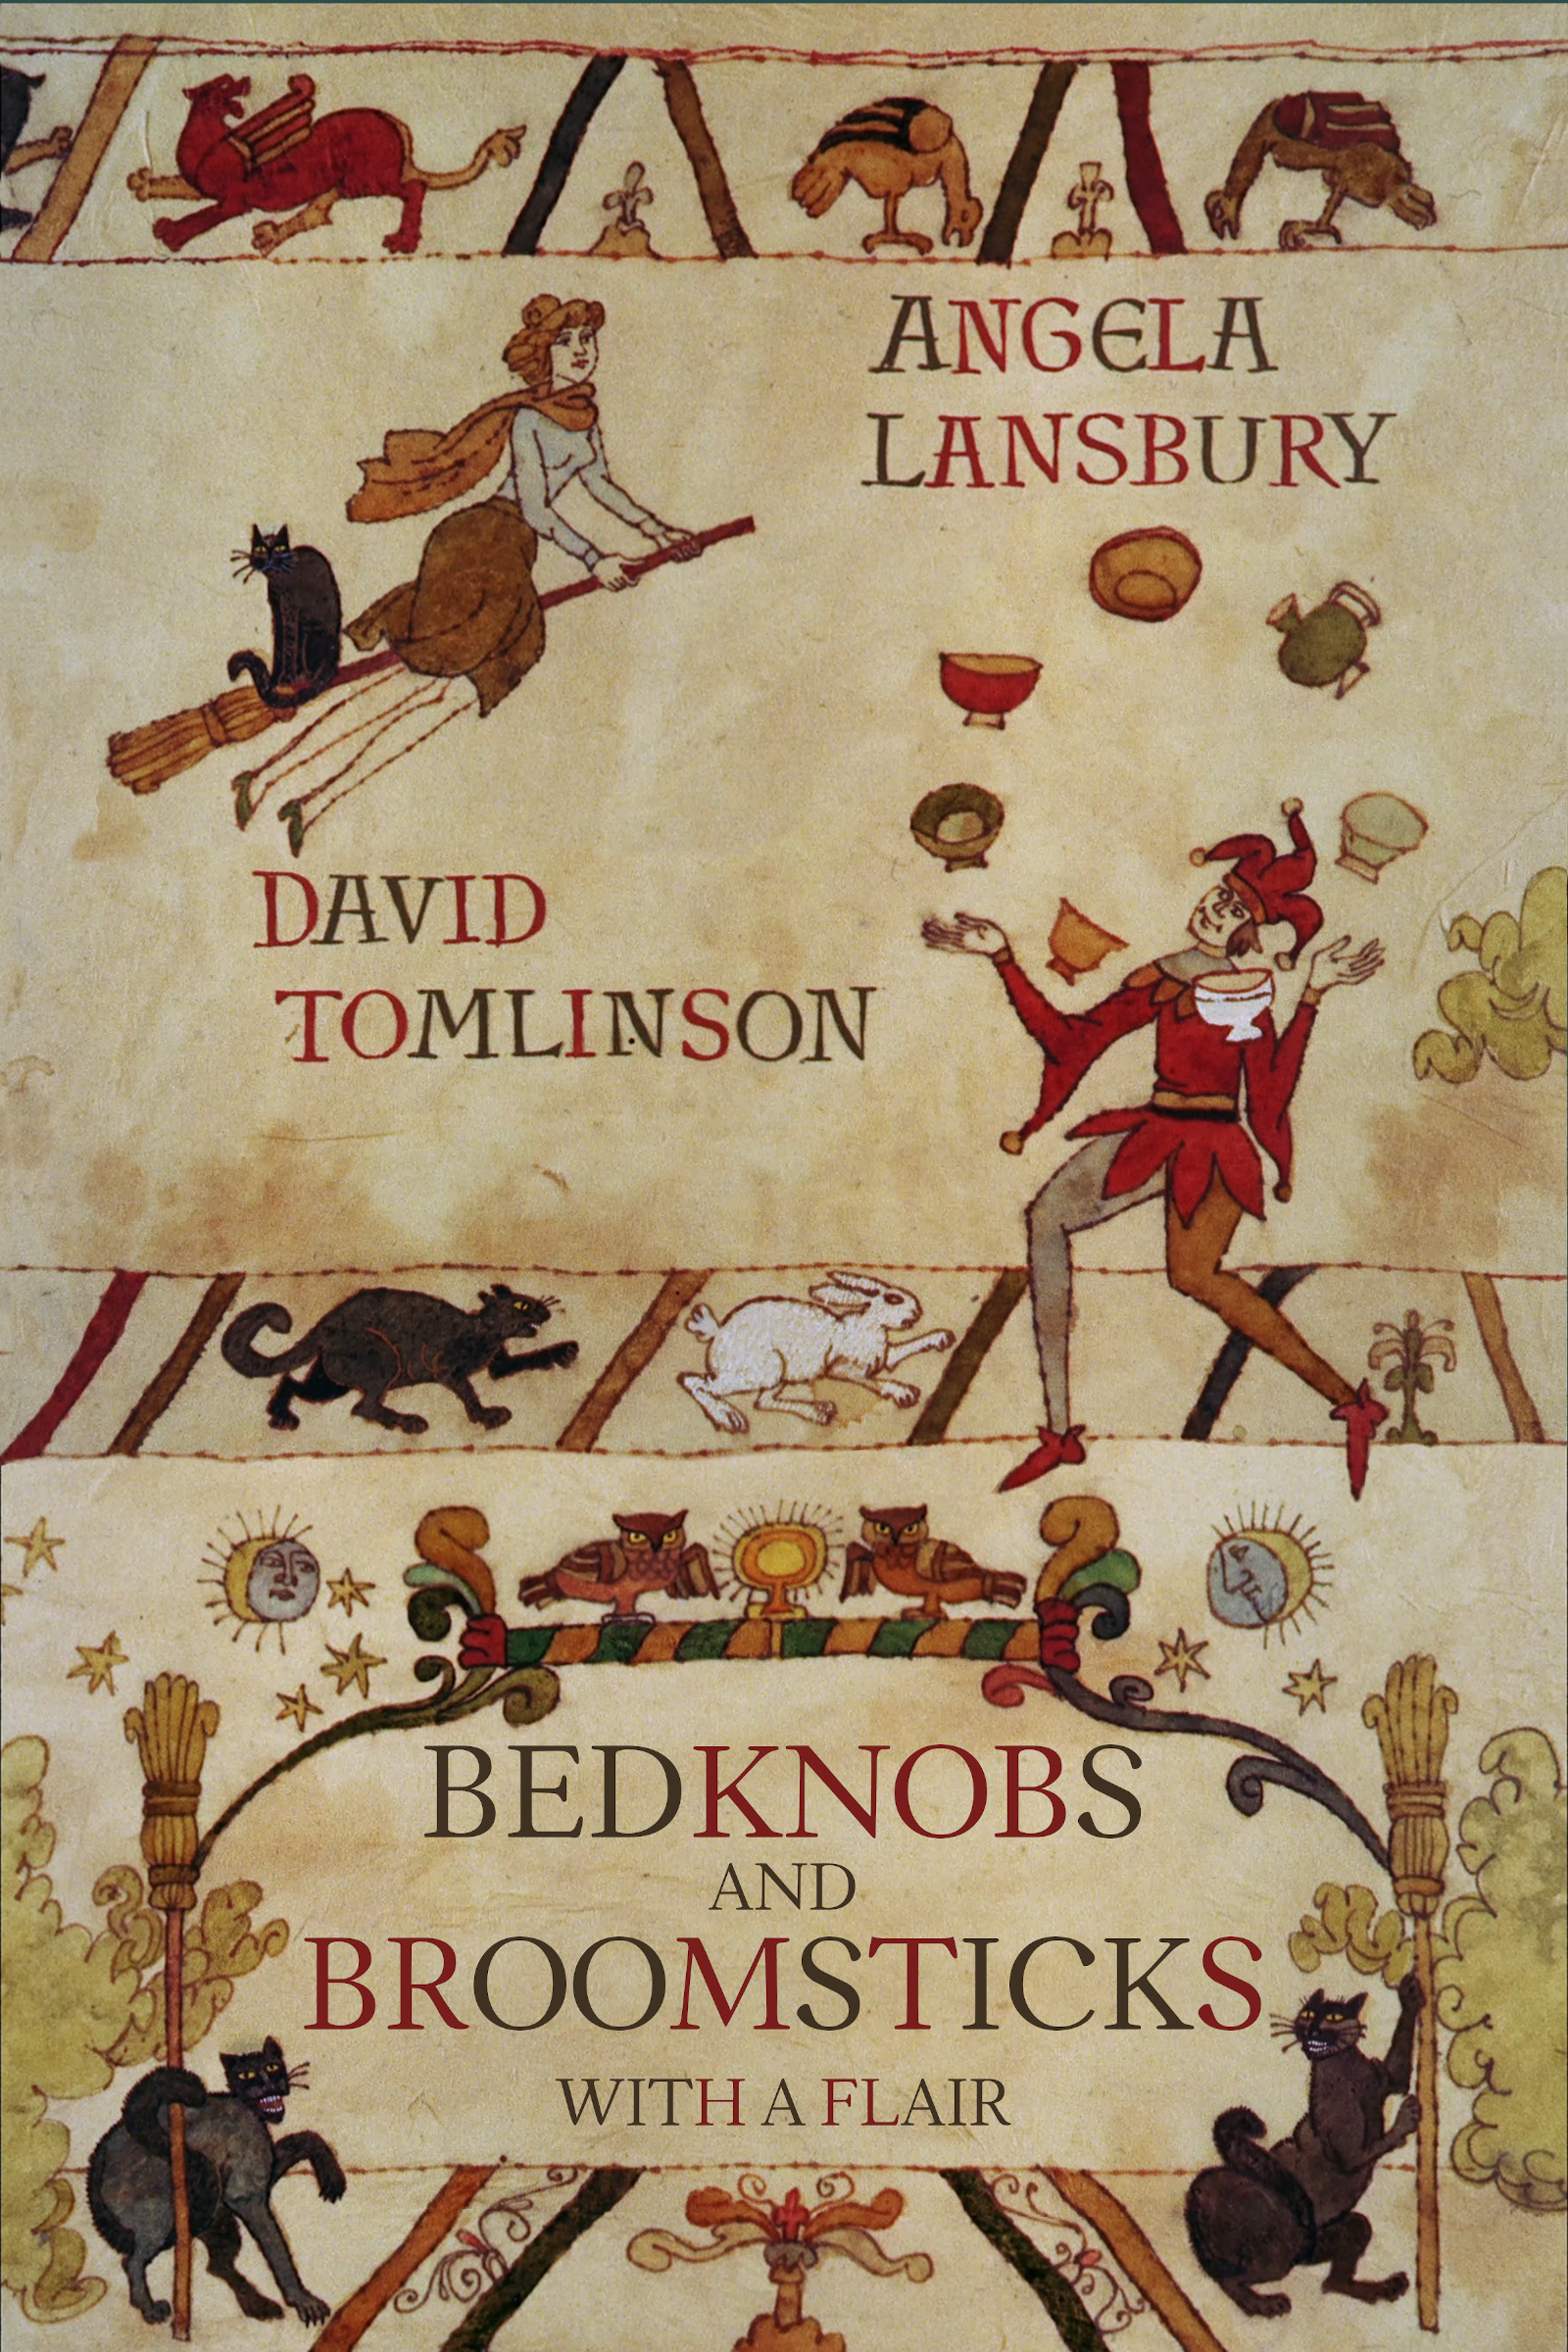 Bedknobs and Broomsticks - With a Flair.png